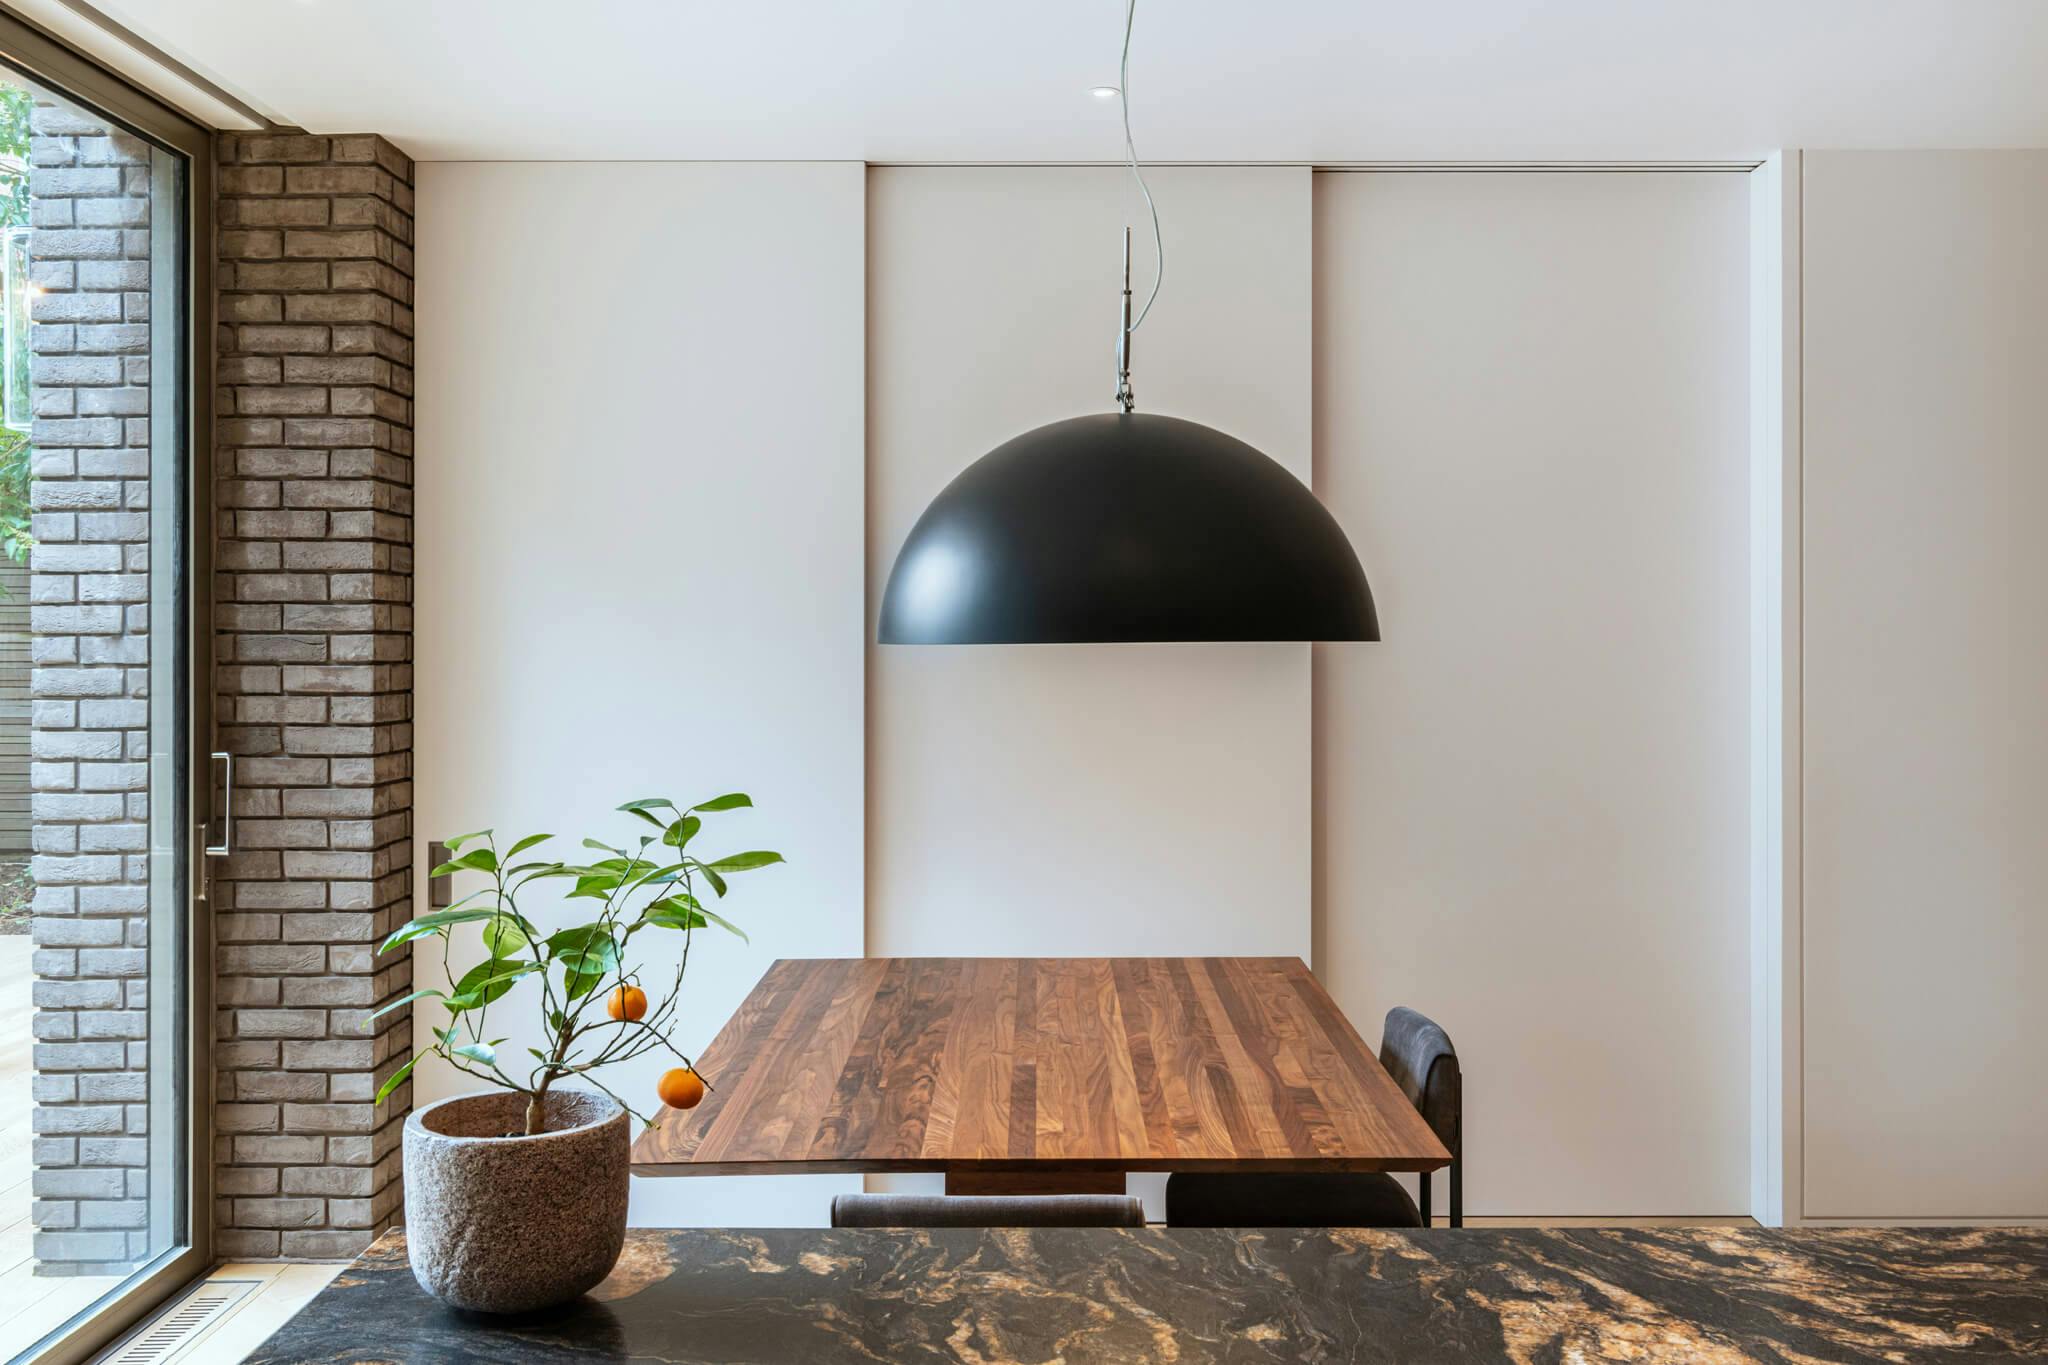 A view from the kitchen of a large metal dome hanging light with an orange plant, wooden table and a triple set of telescopic sliding doors.